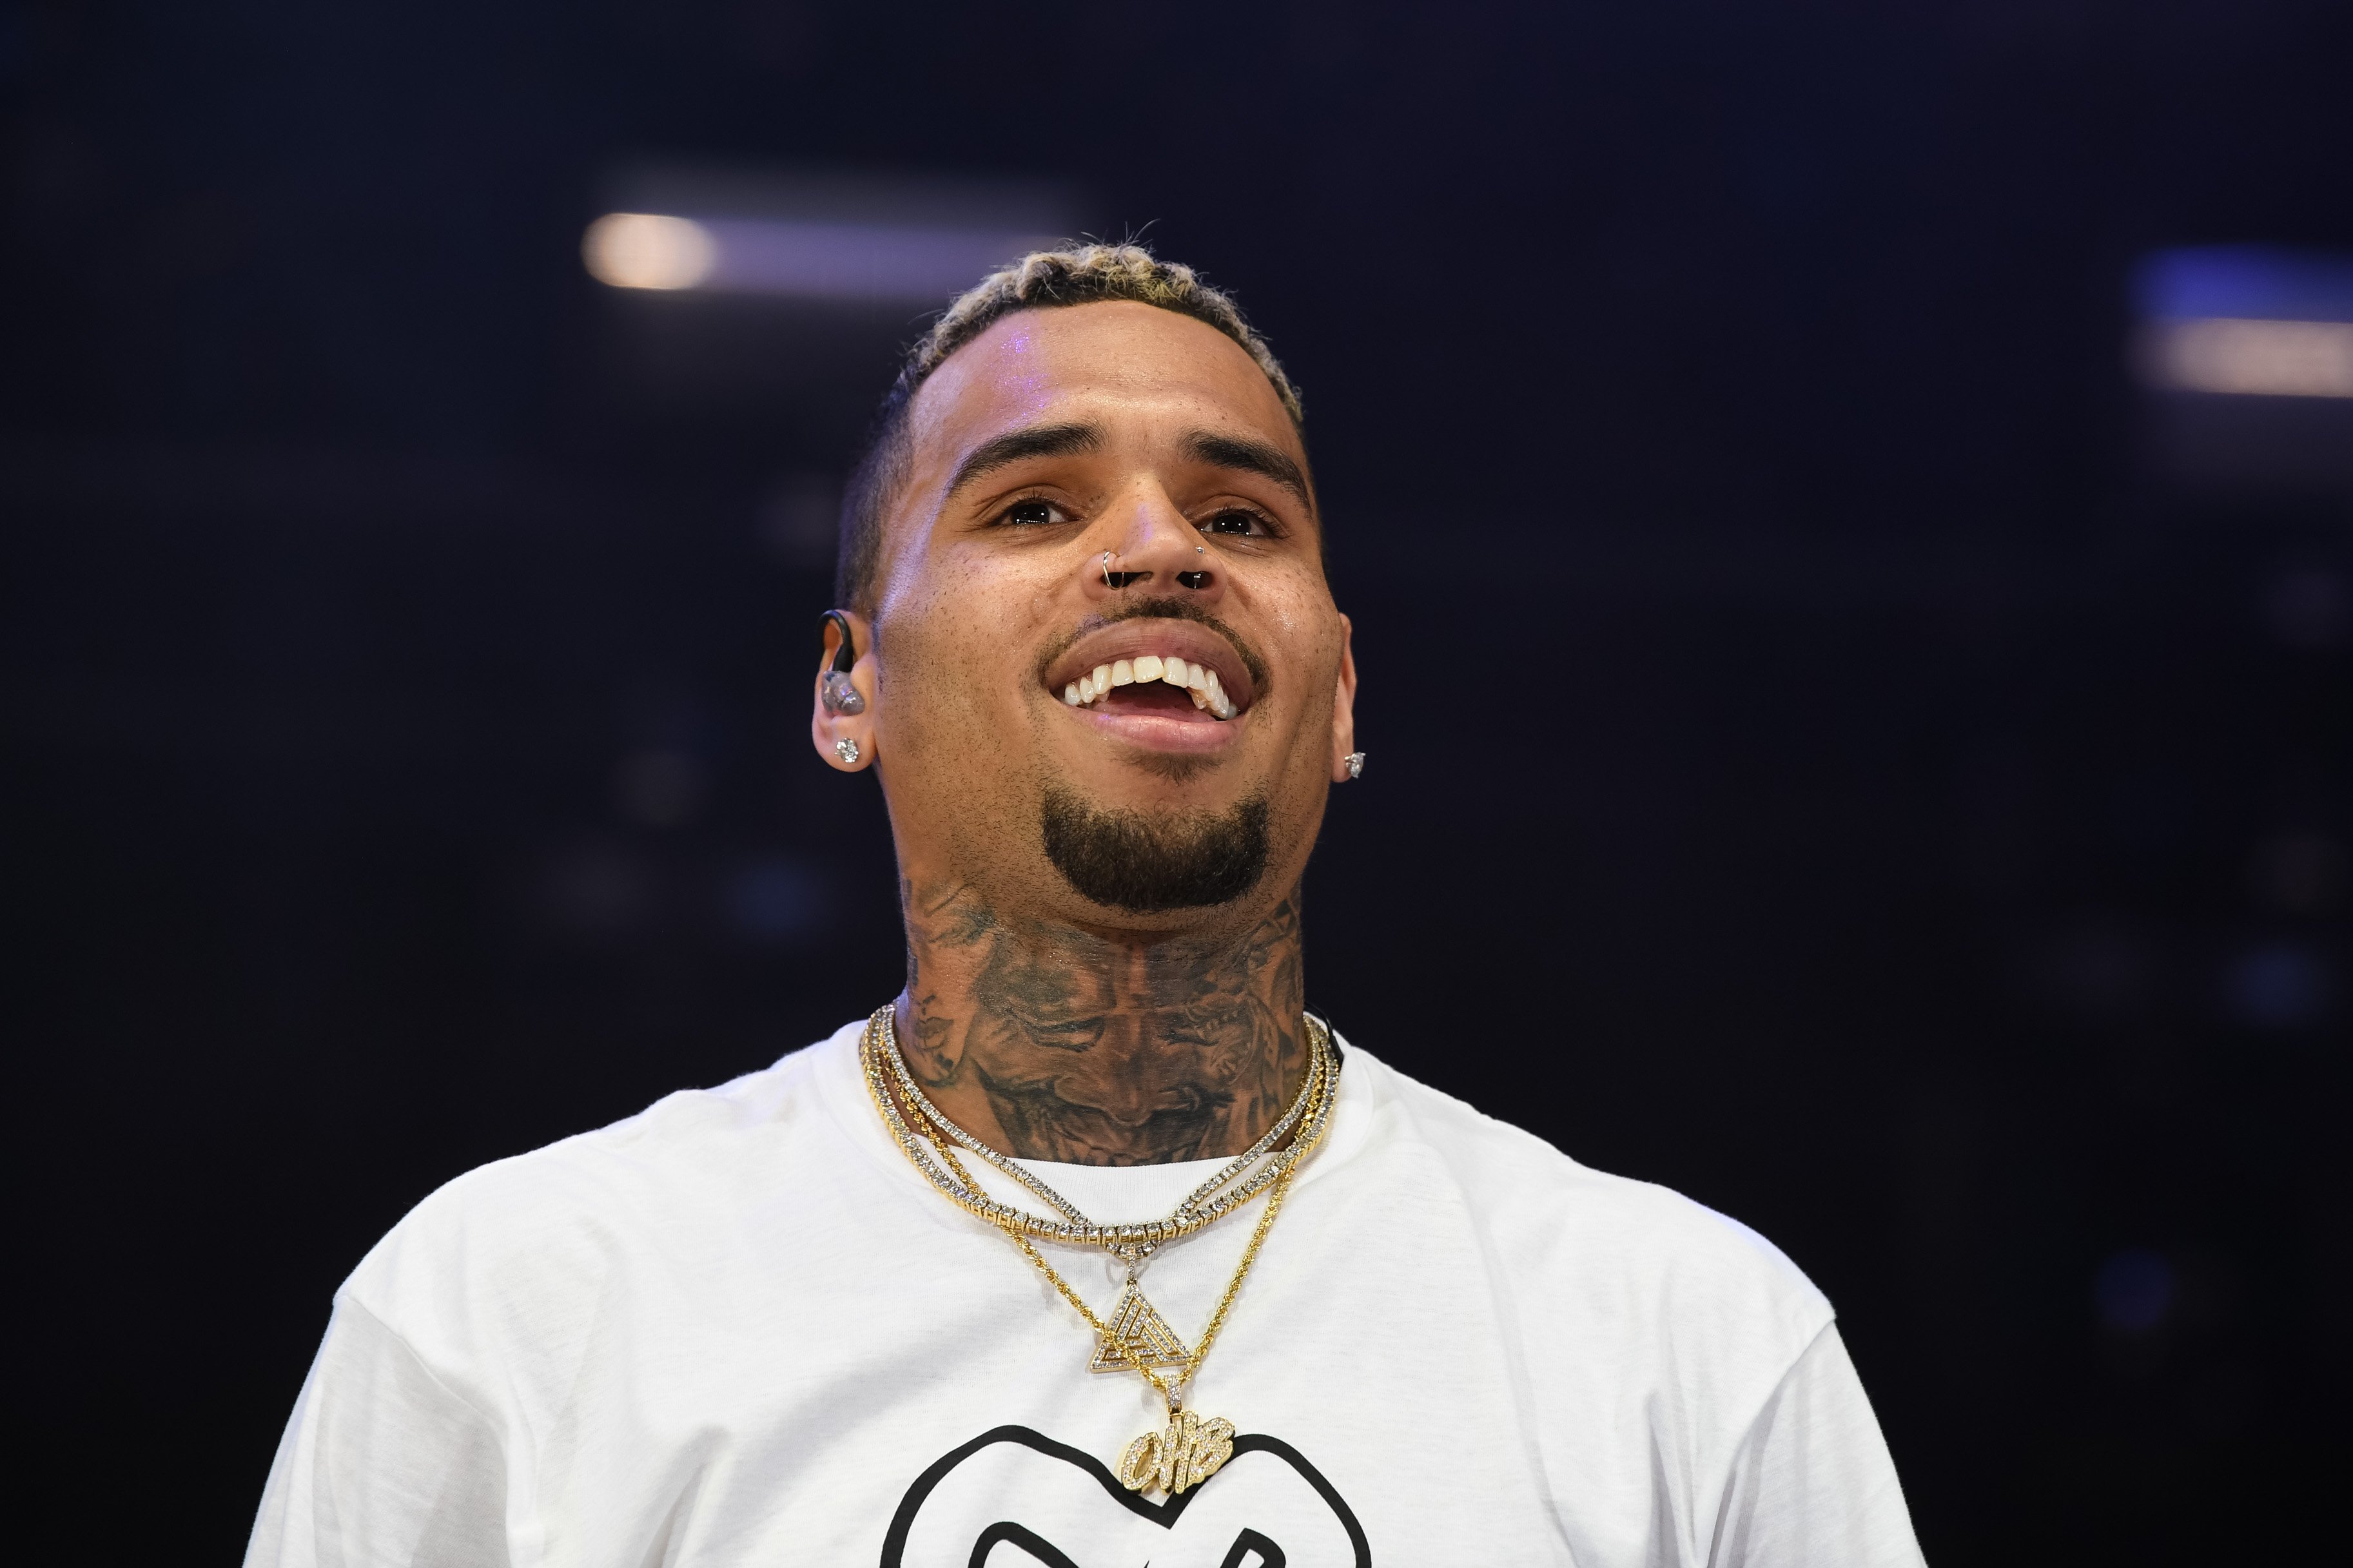 Chris Brown sings at HOT 97 Summer Jam 2017 on June 11, 2017 in East Rutherford, New Jersey. | Source: Getty Images